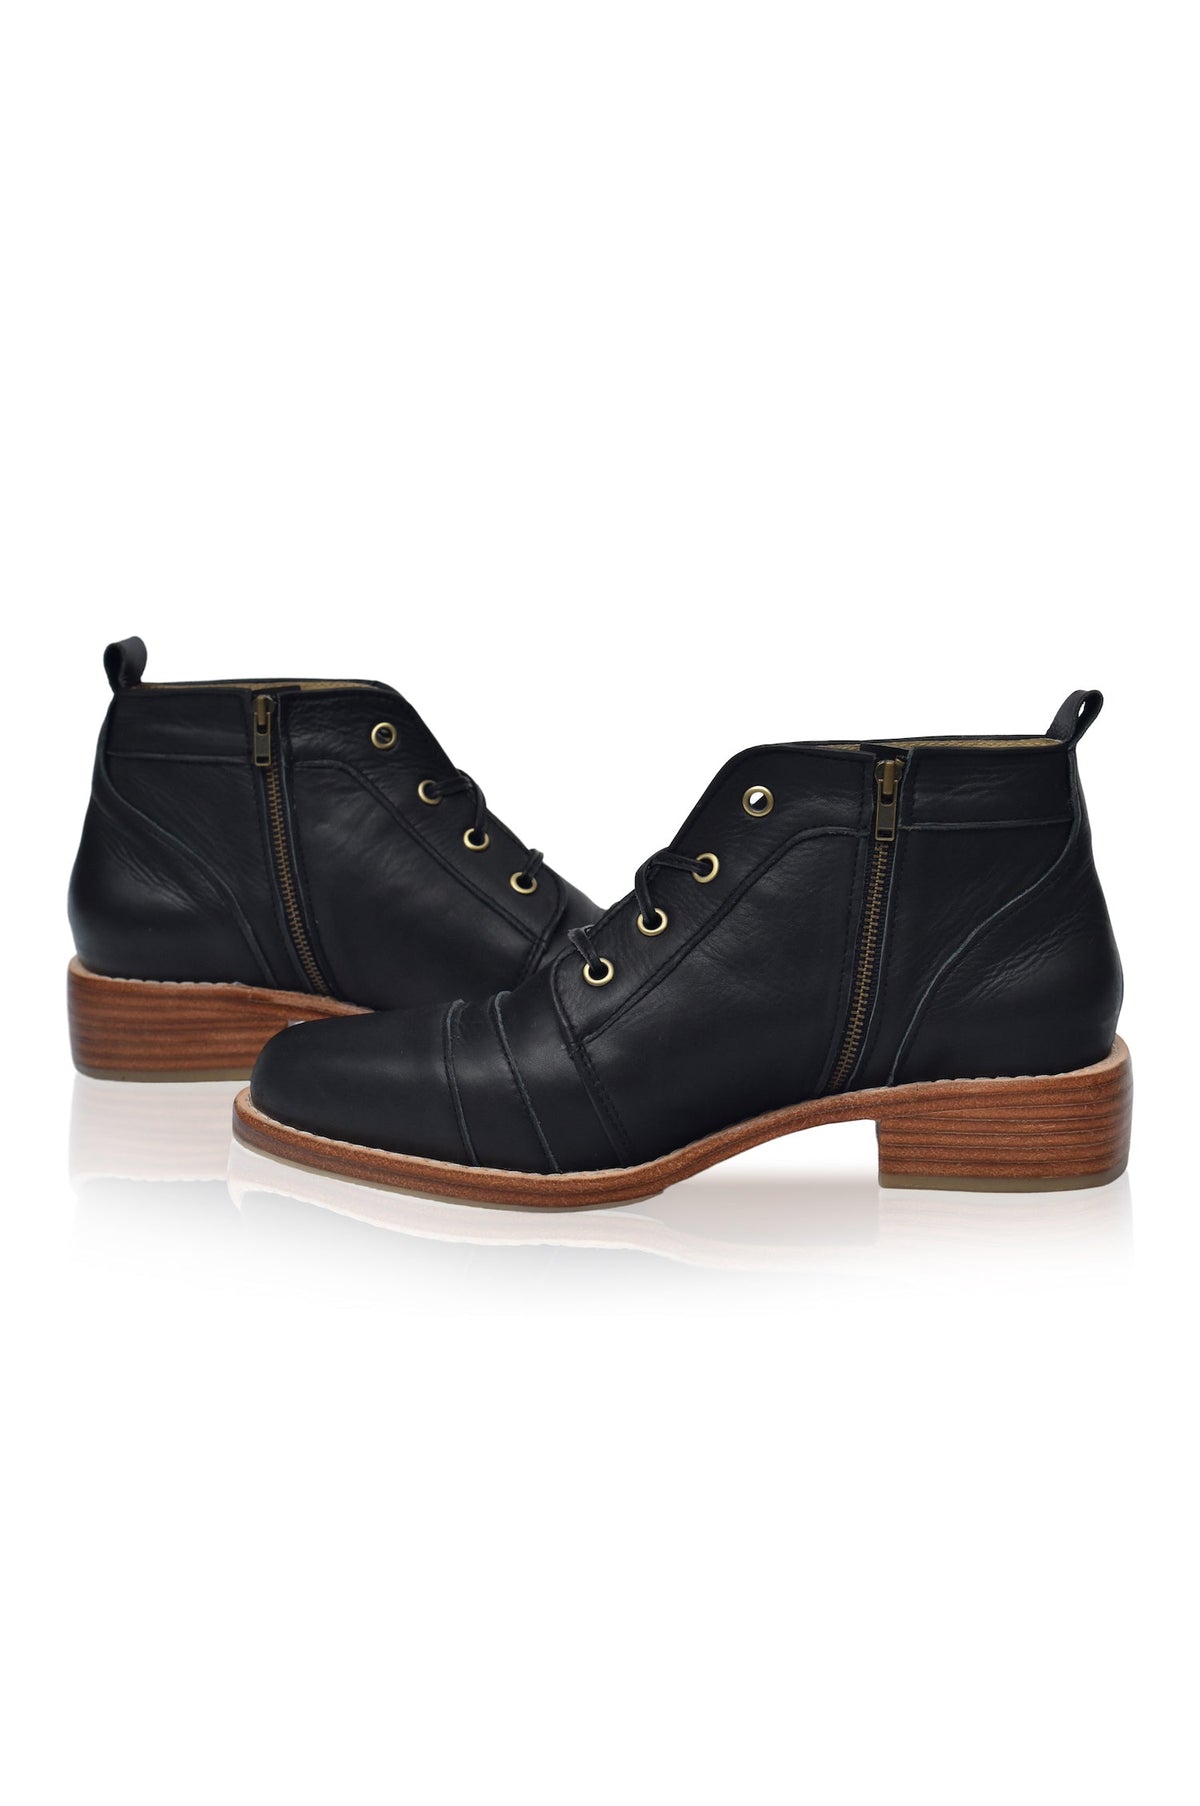 Passage Lace Up Boots by ELF